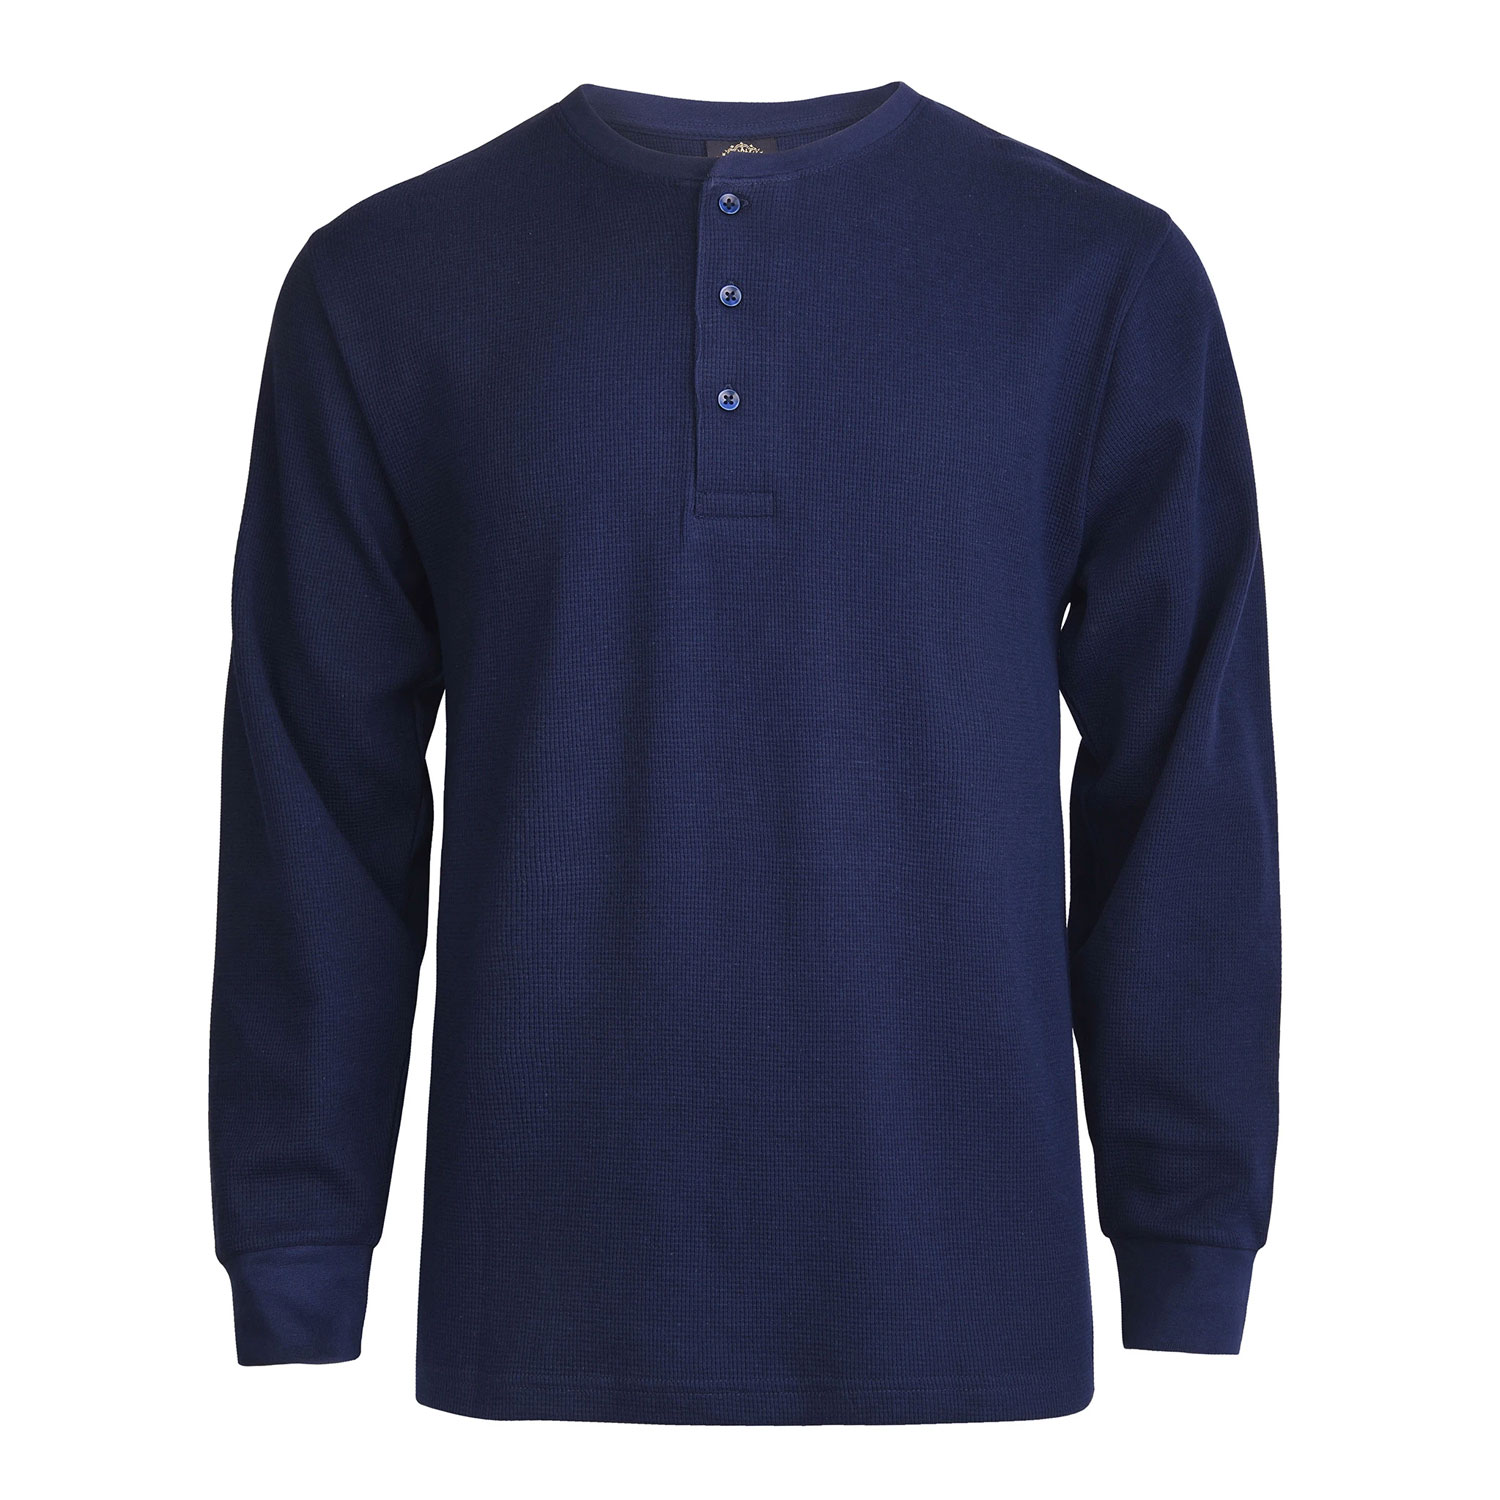 Buy One Get One Free Men's Waffle Knit Thermal Henley Shirt